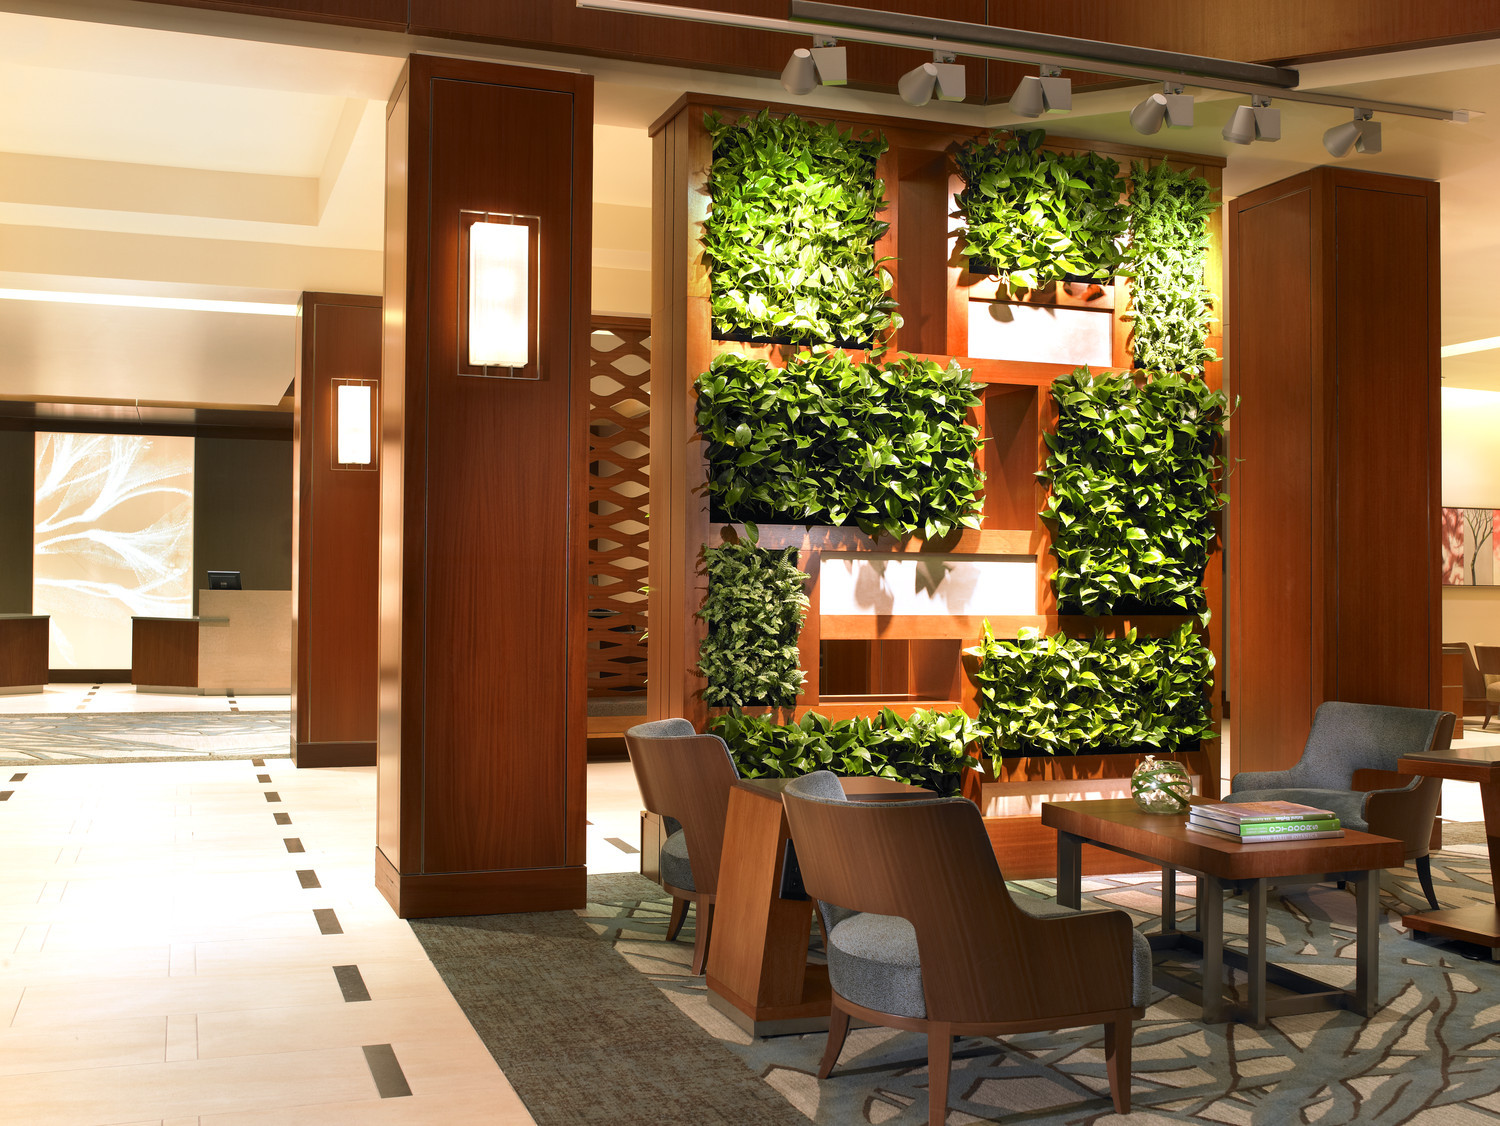 Westin Brings the Outdoors In with Innovative Vertical Gardens